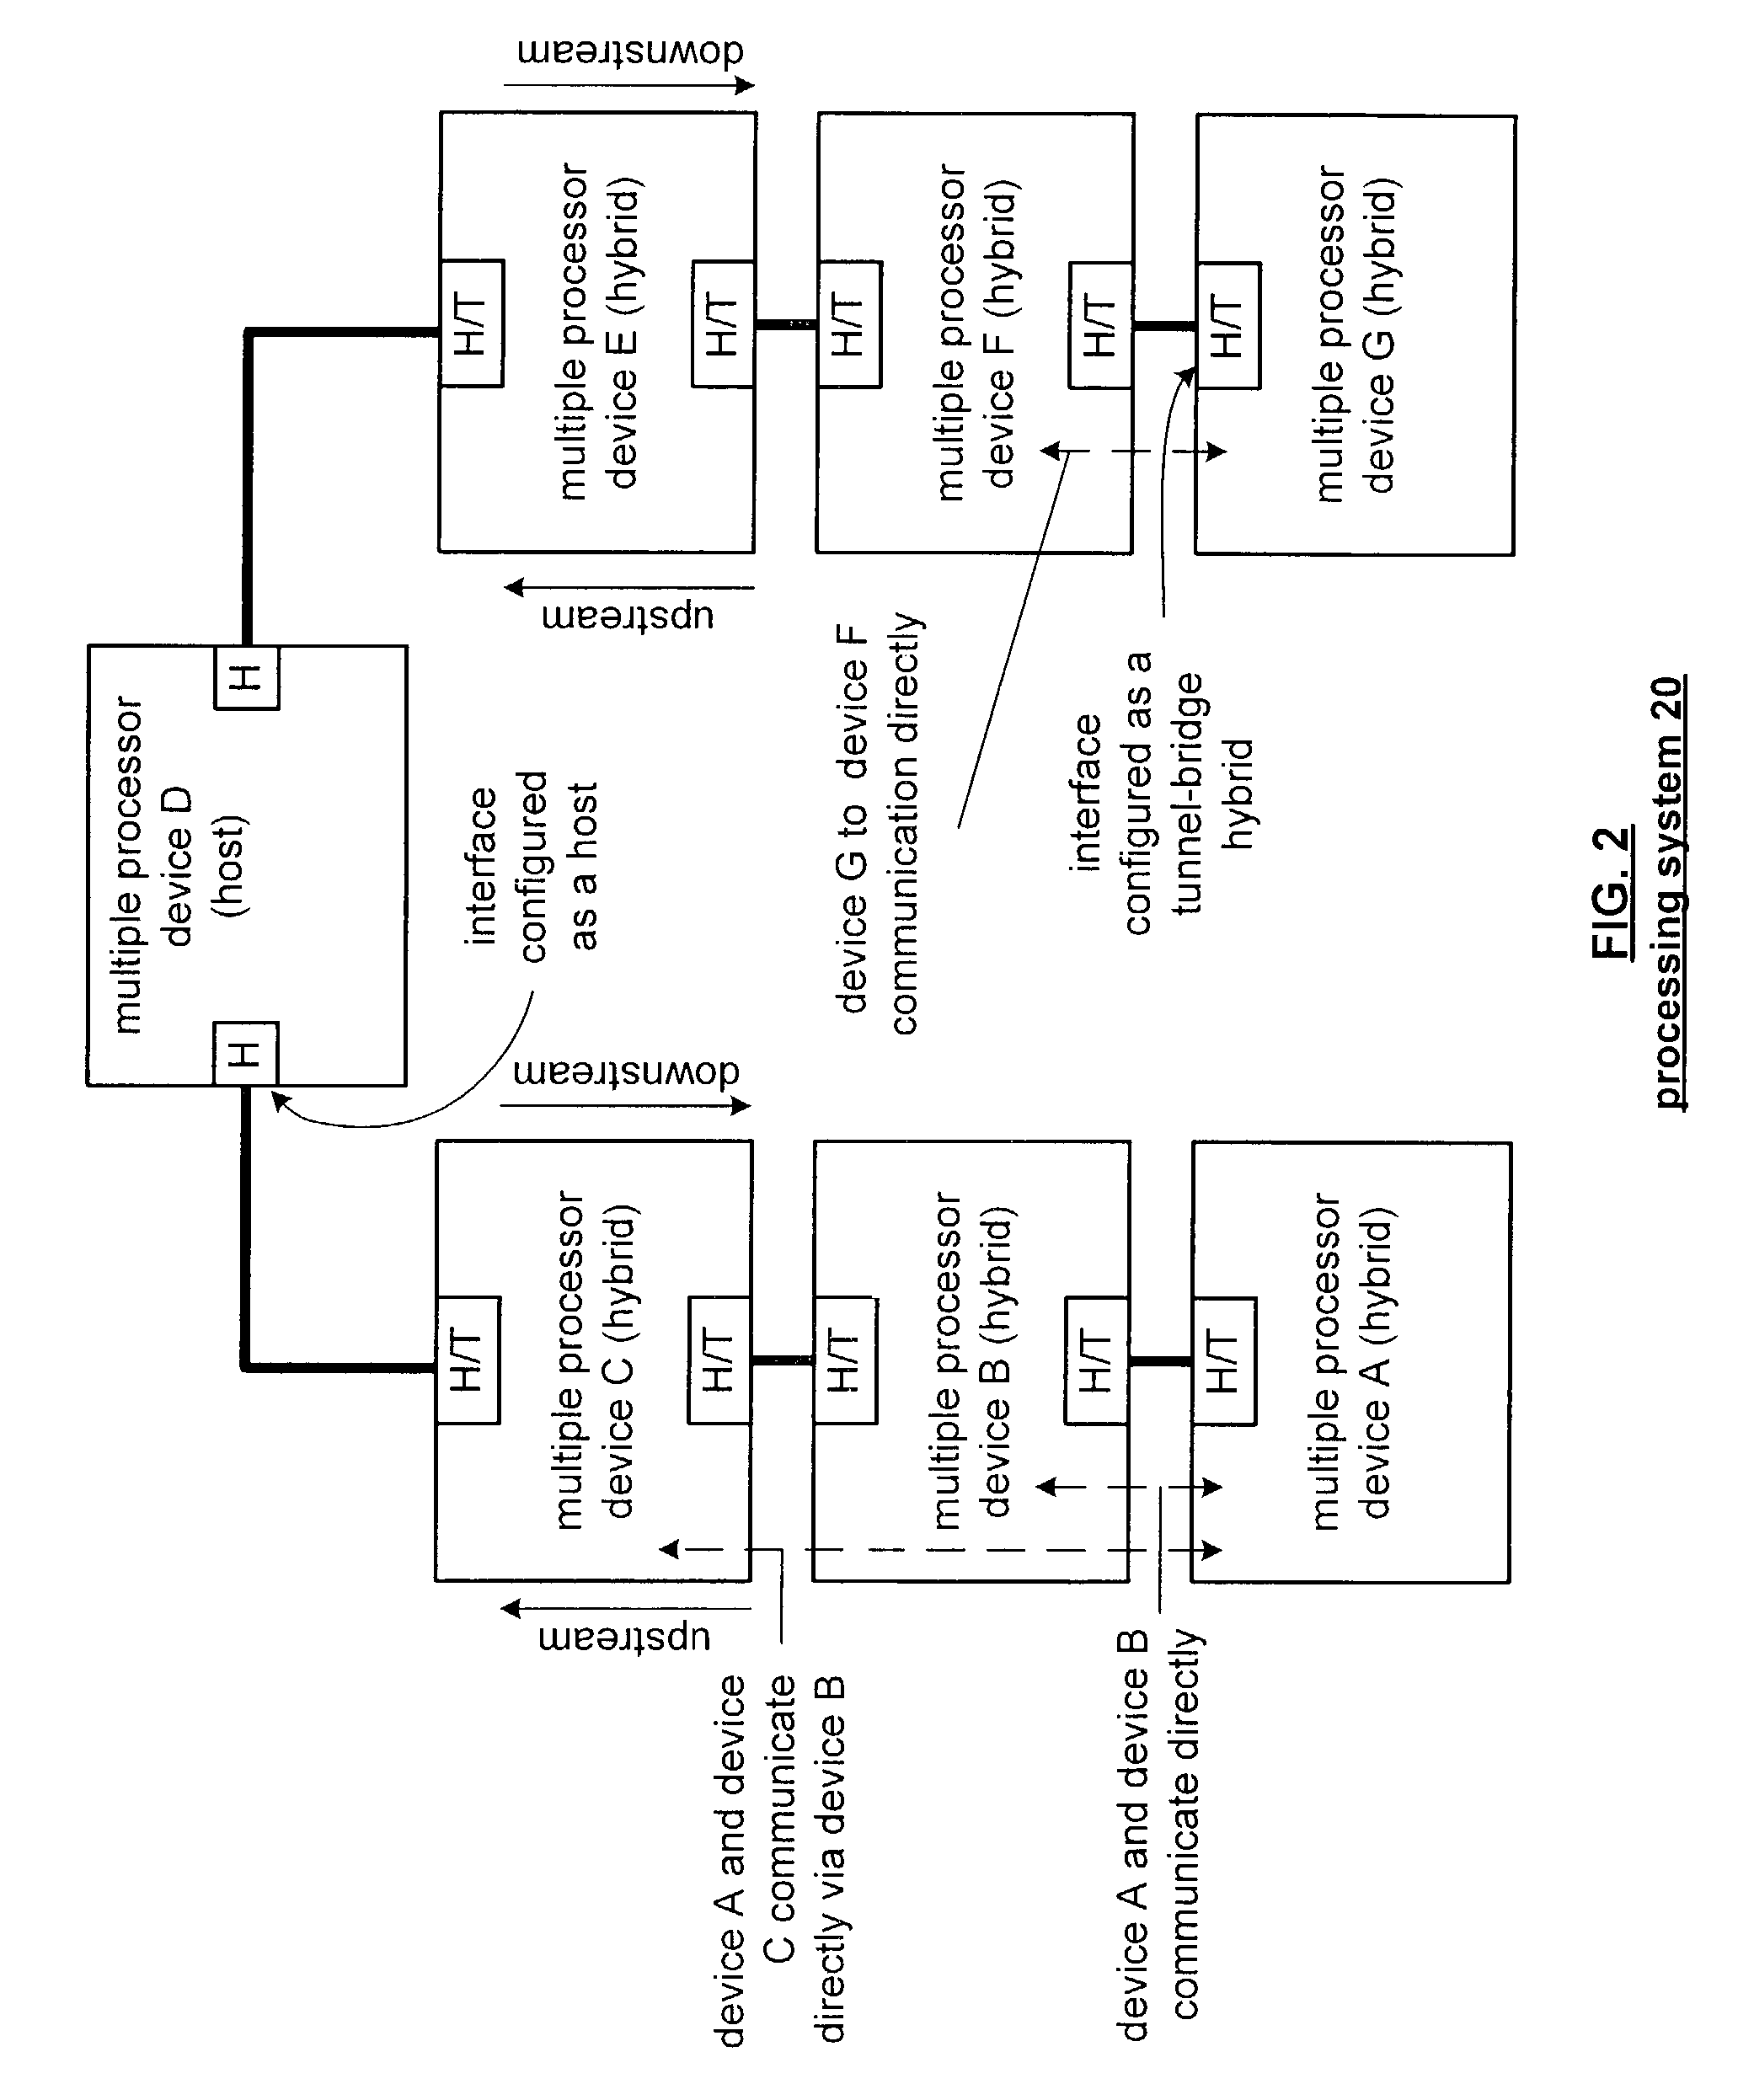 Smart routing between peers in a point-to-point link based system